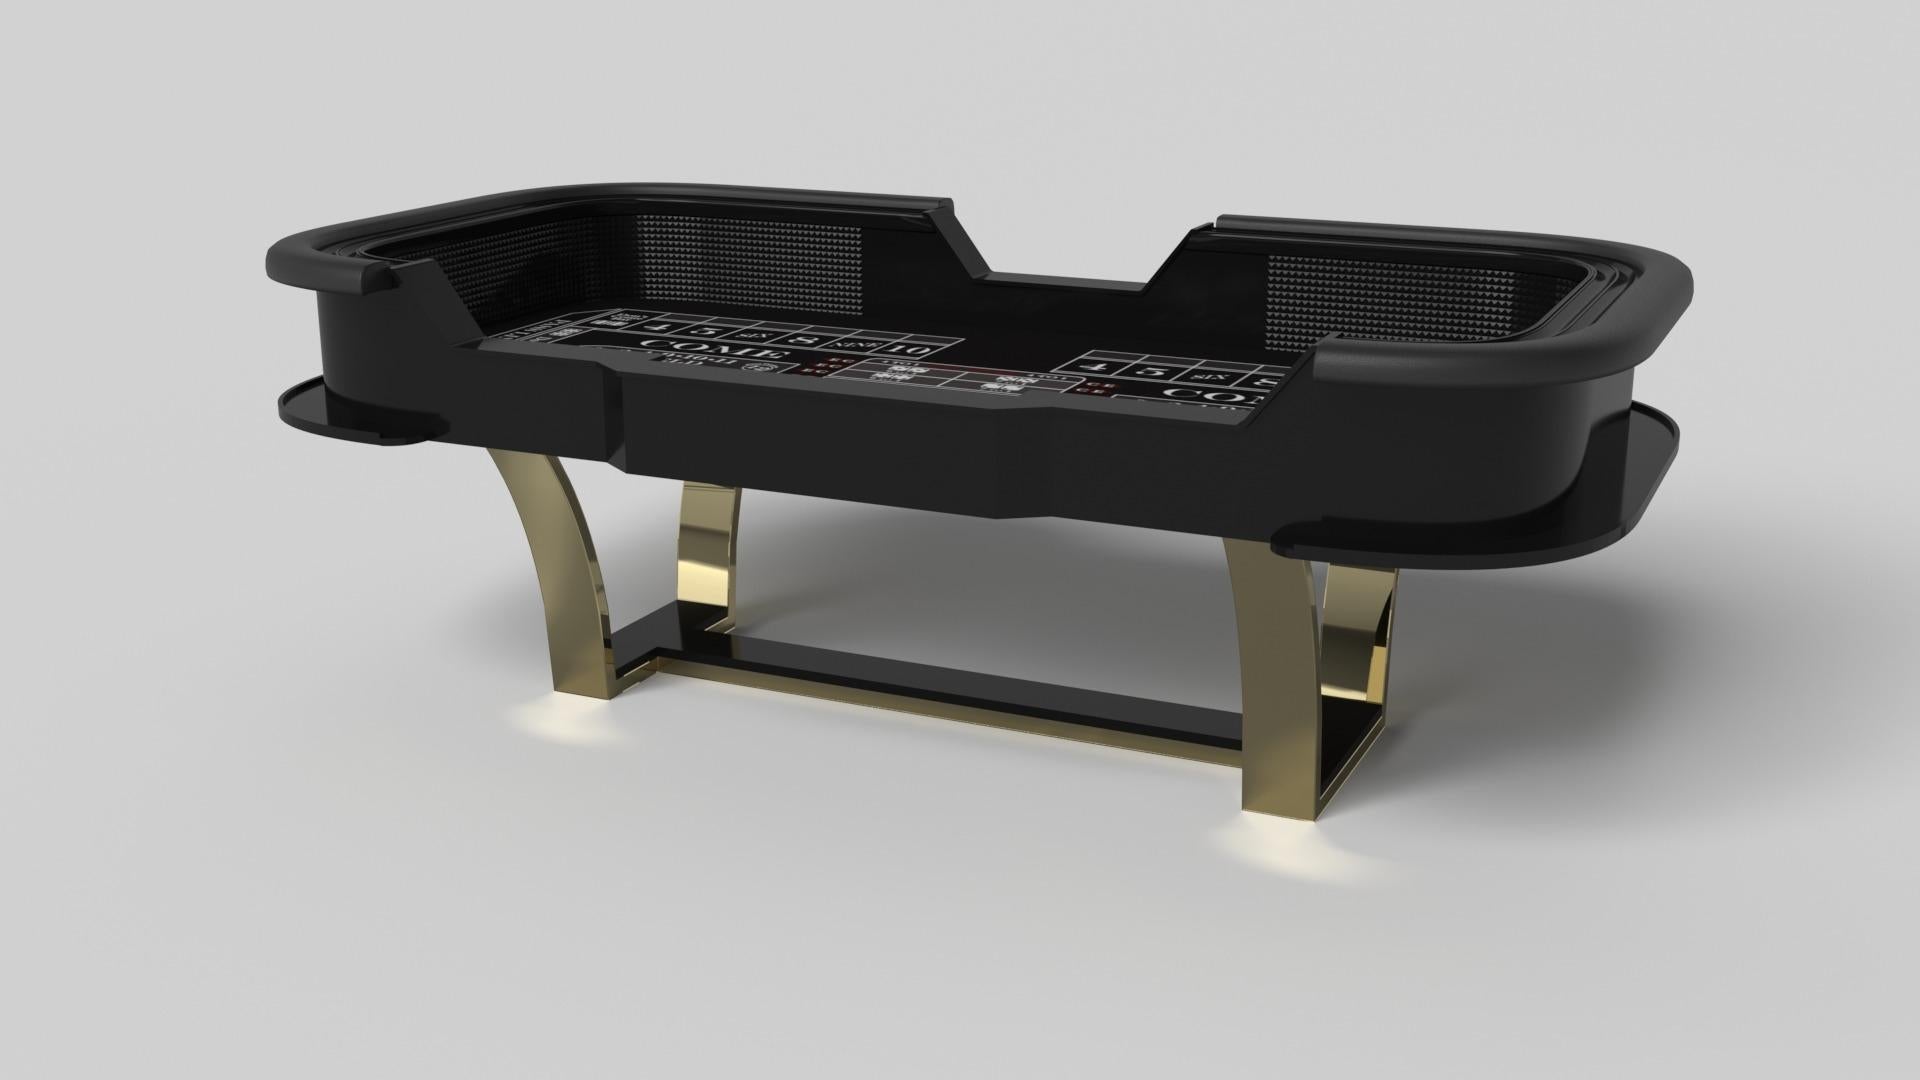 With an I-shaped metal base, slightly sloped metal legs, and a contrasting wood top, the Elite craps table exudes modern sophistication while evoking a sense of art deco design. This table is a confluence of style, made to meet today's demands and